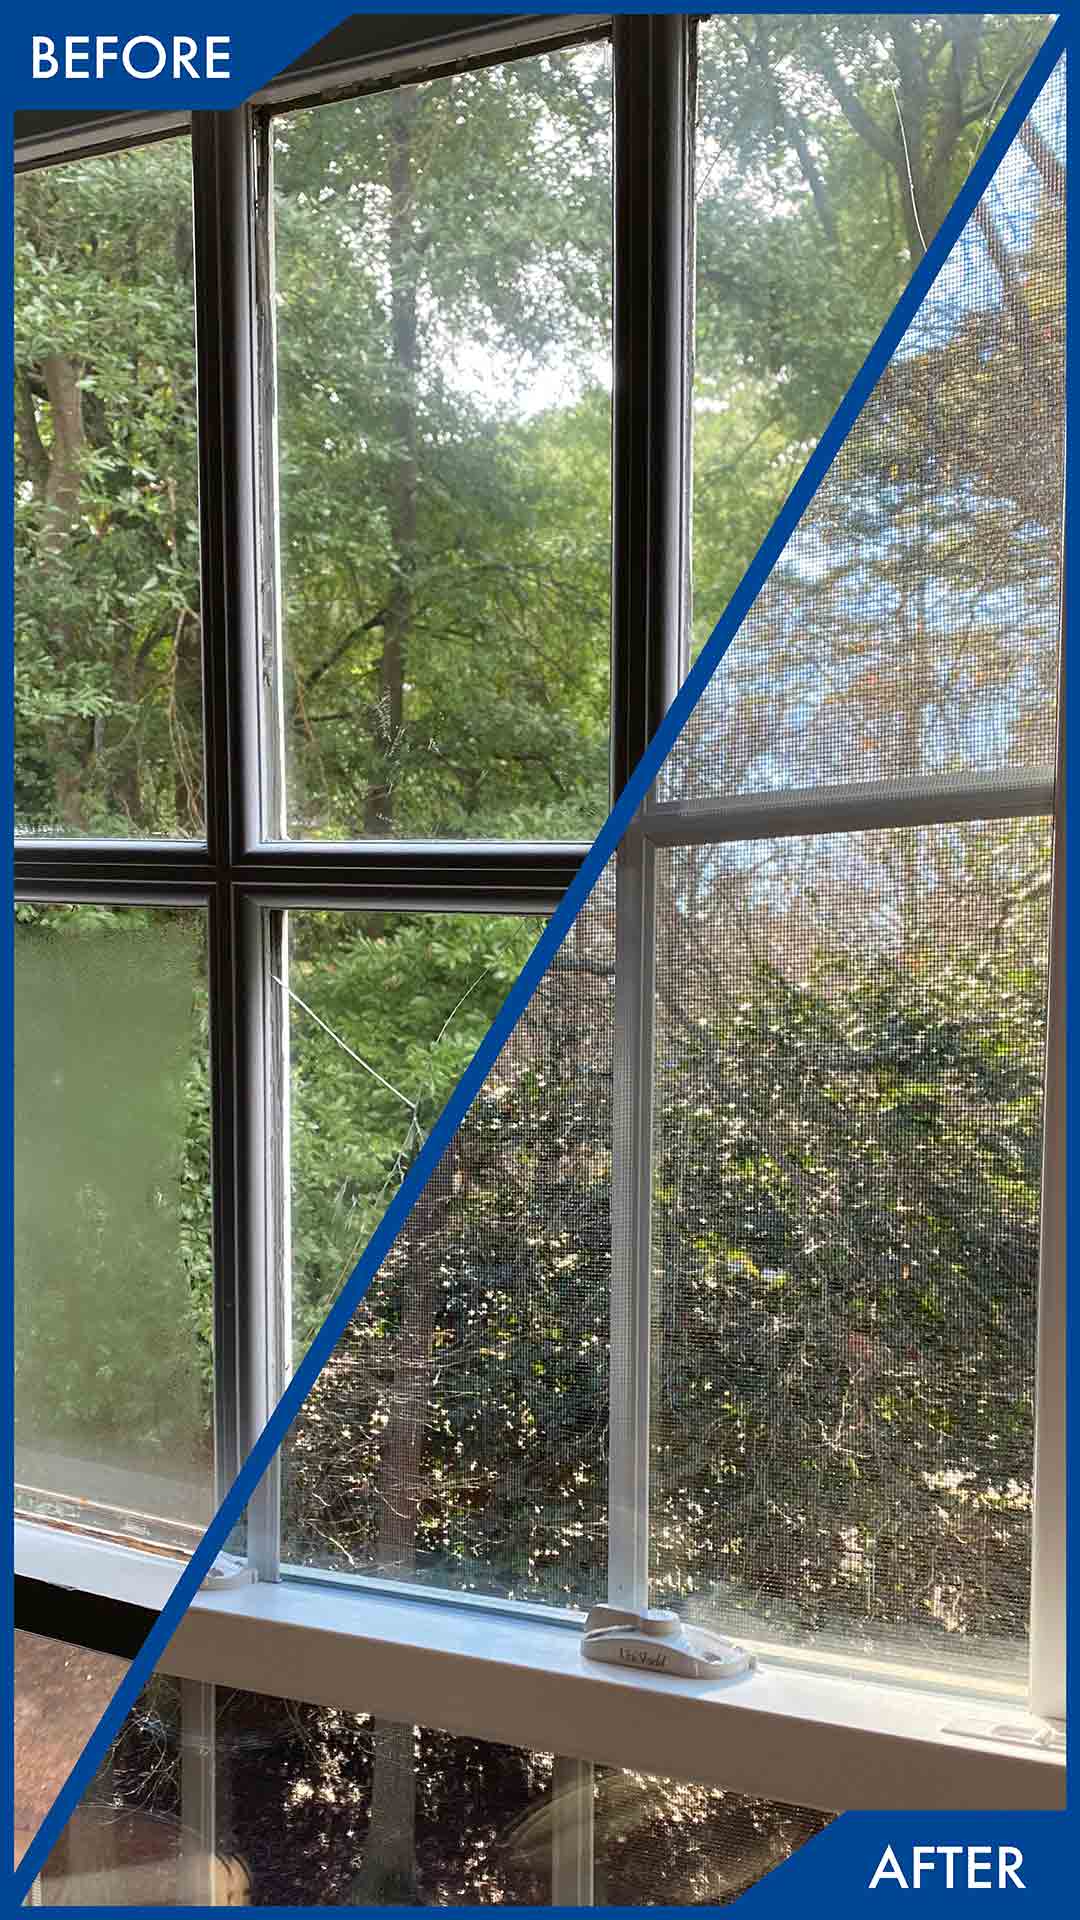 A comparison of a window before and after replacement